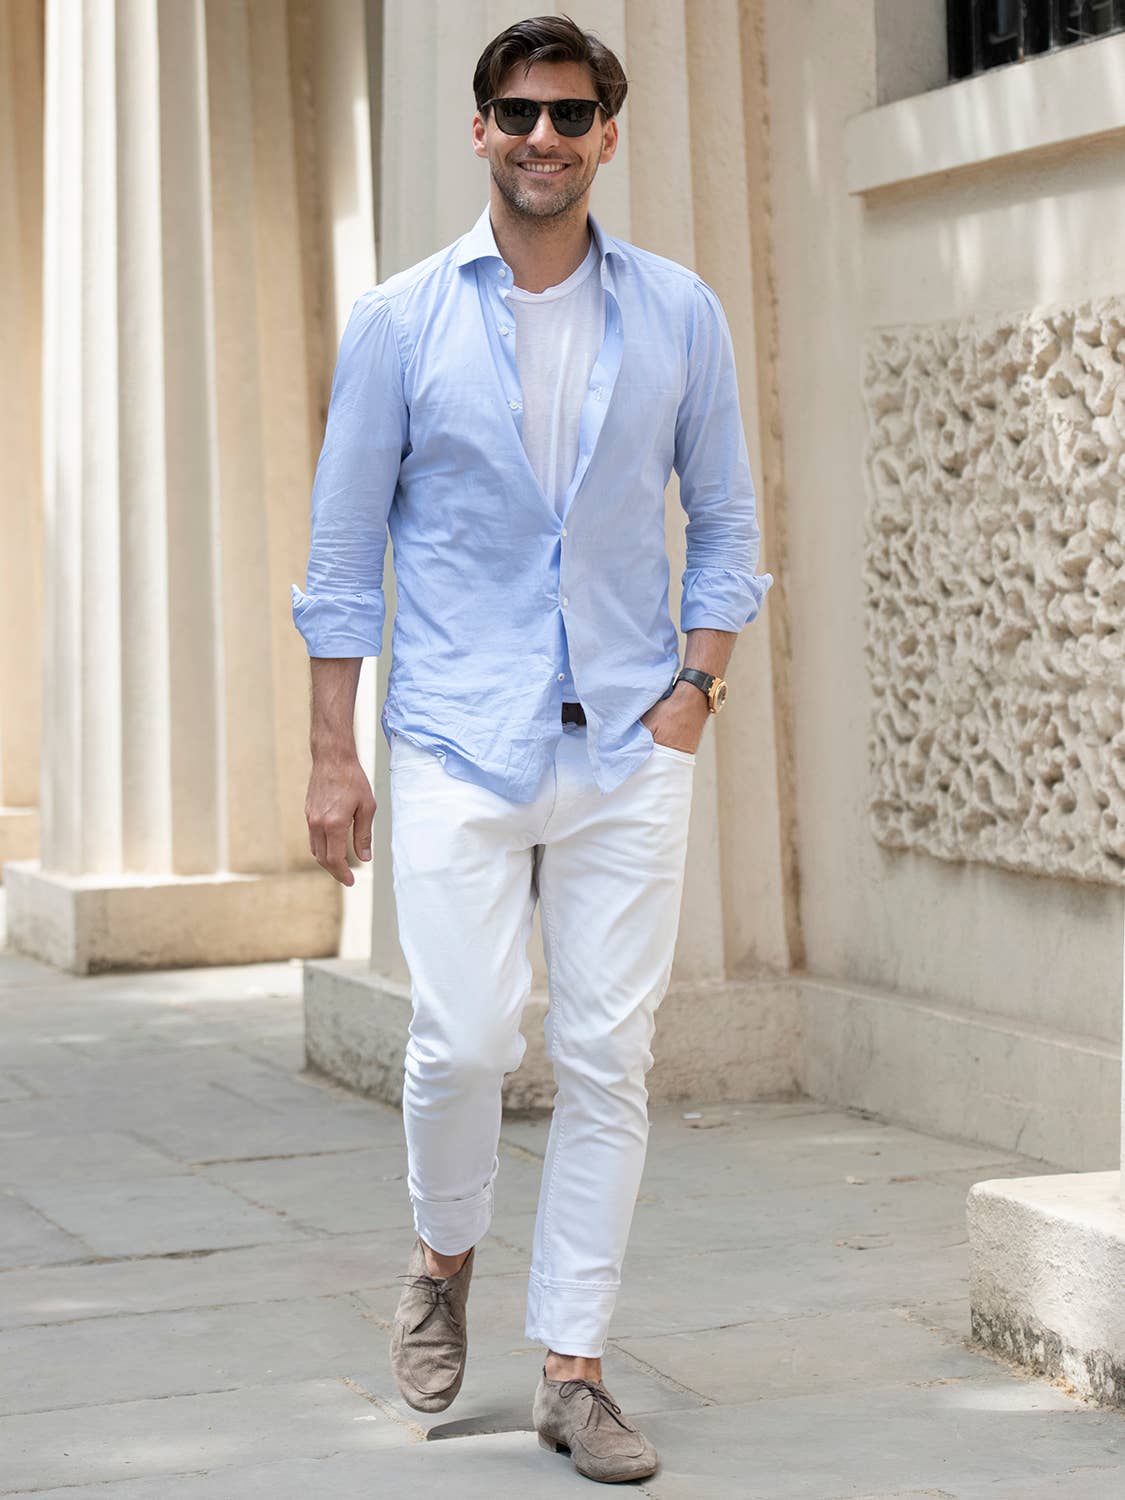 Men's outfit idea for 2022 with blue linen shirt, white crew neck t-shirt, white jeans, black thick framed sunglasses, neutral suede shoes / desert shoes. Suitable for spring and summer.